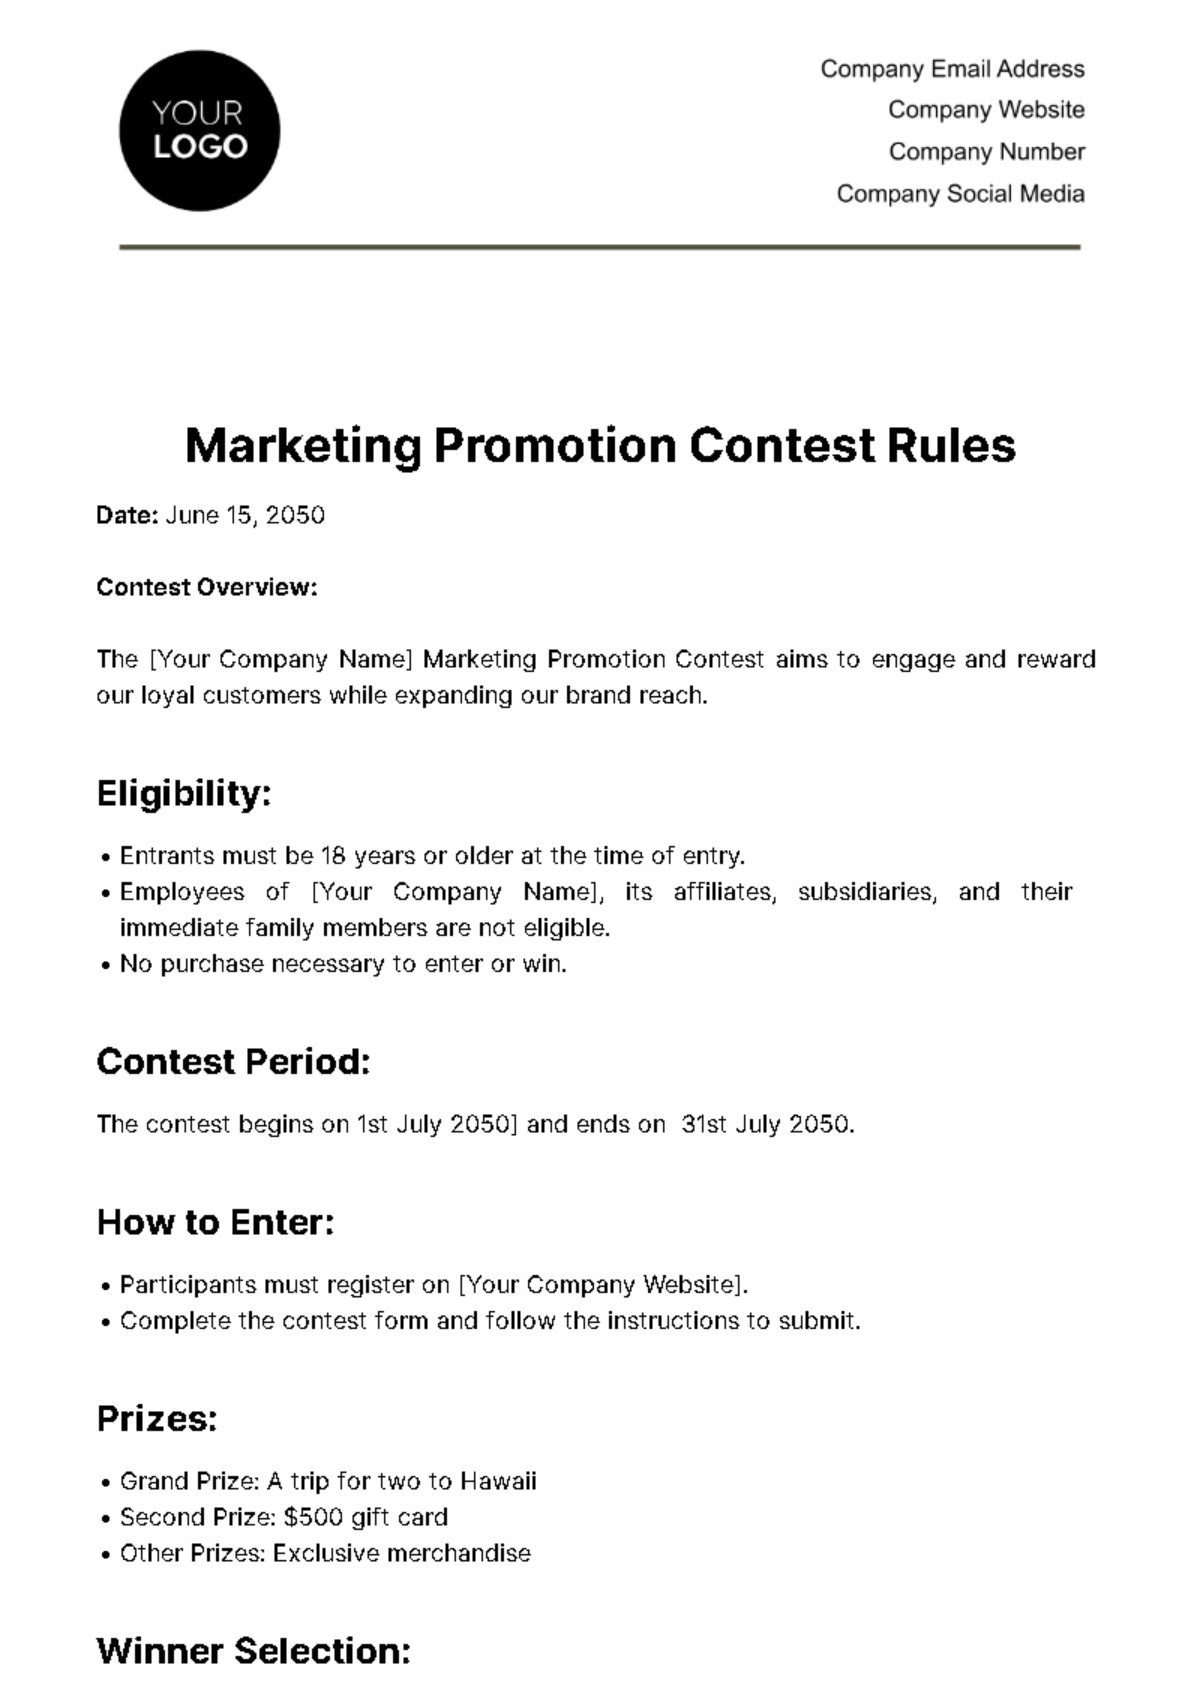 Free Marketing Promotion Contest Rules Template